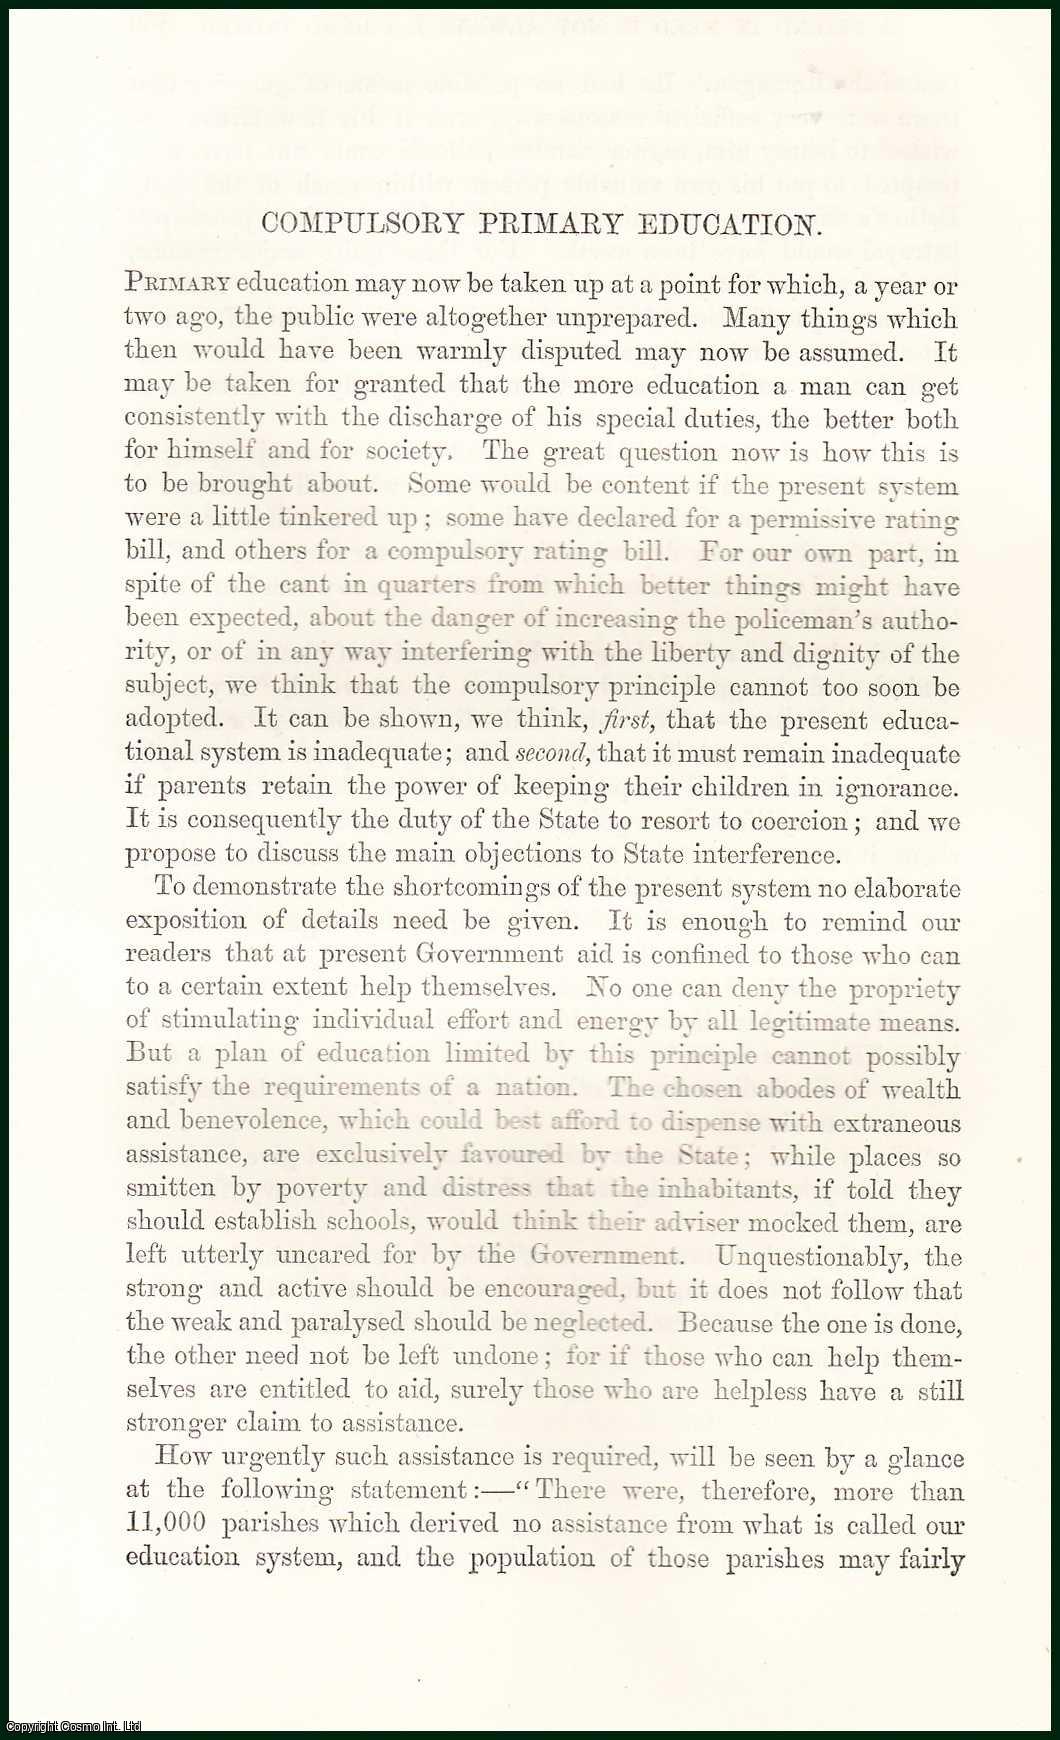 Dudley Campbell - Compulsory Primary Education. An uncommon original article from The Fortnightly Review, 1868.